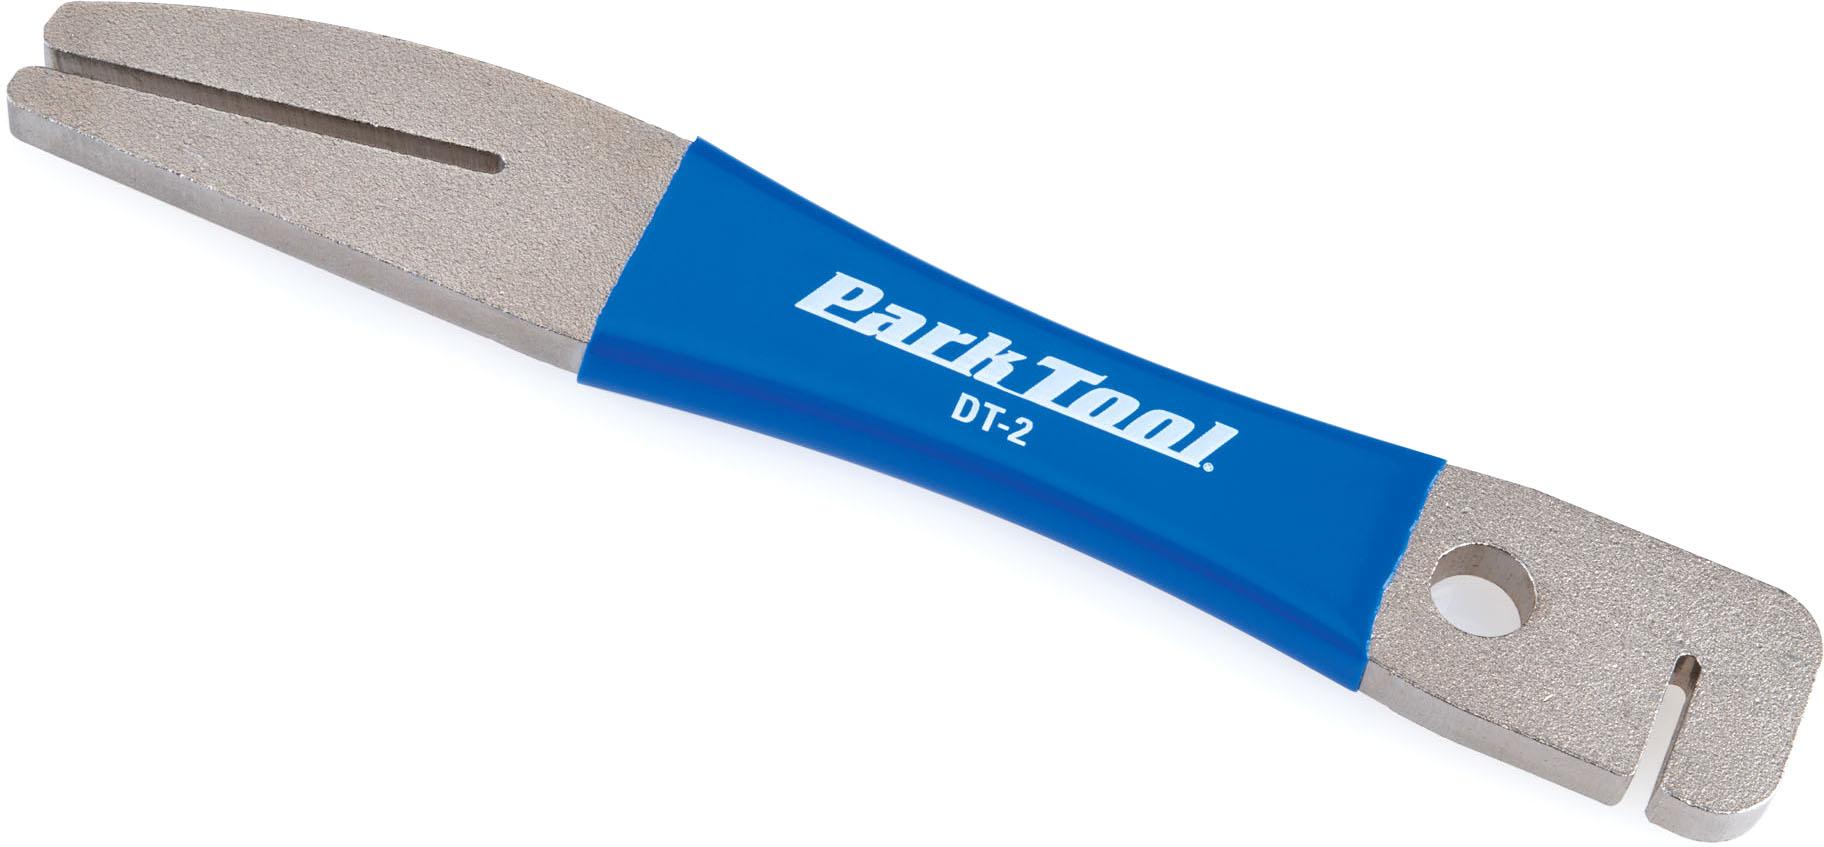 Park Tool Rotor Truing Fork Dt-2 - Blue/silver